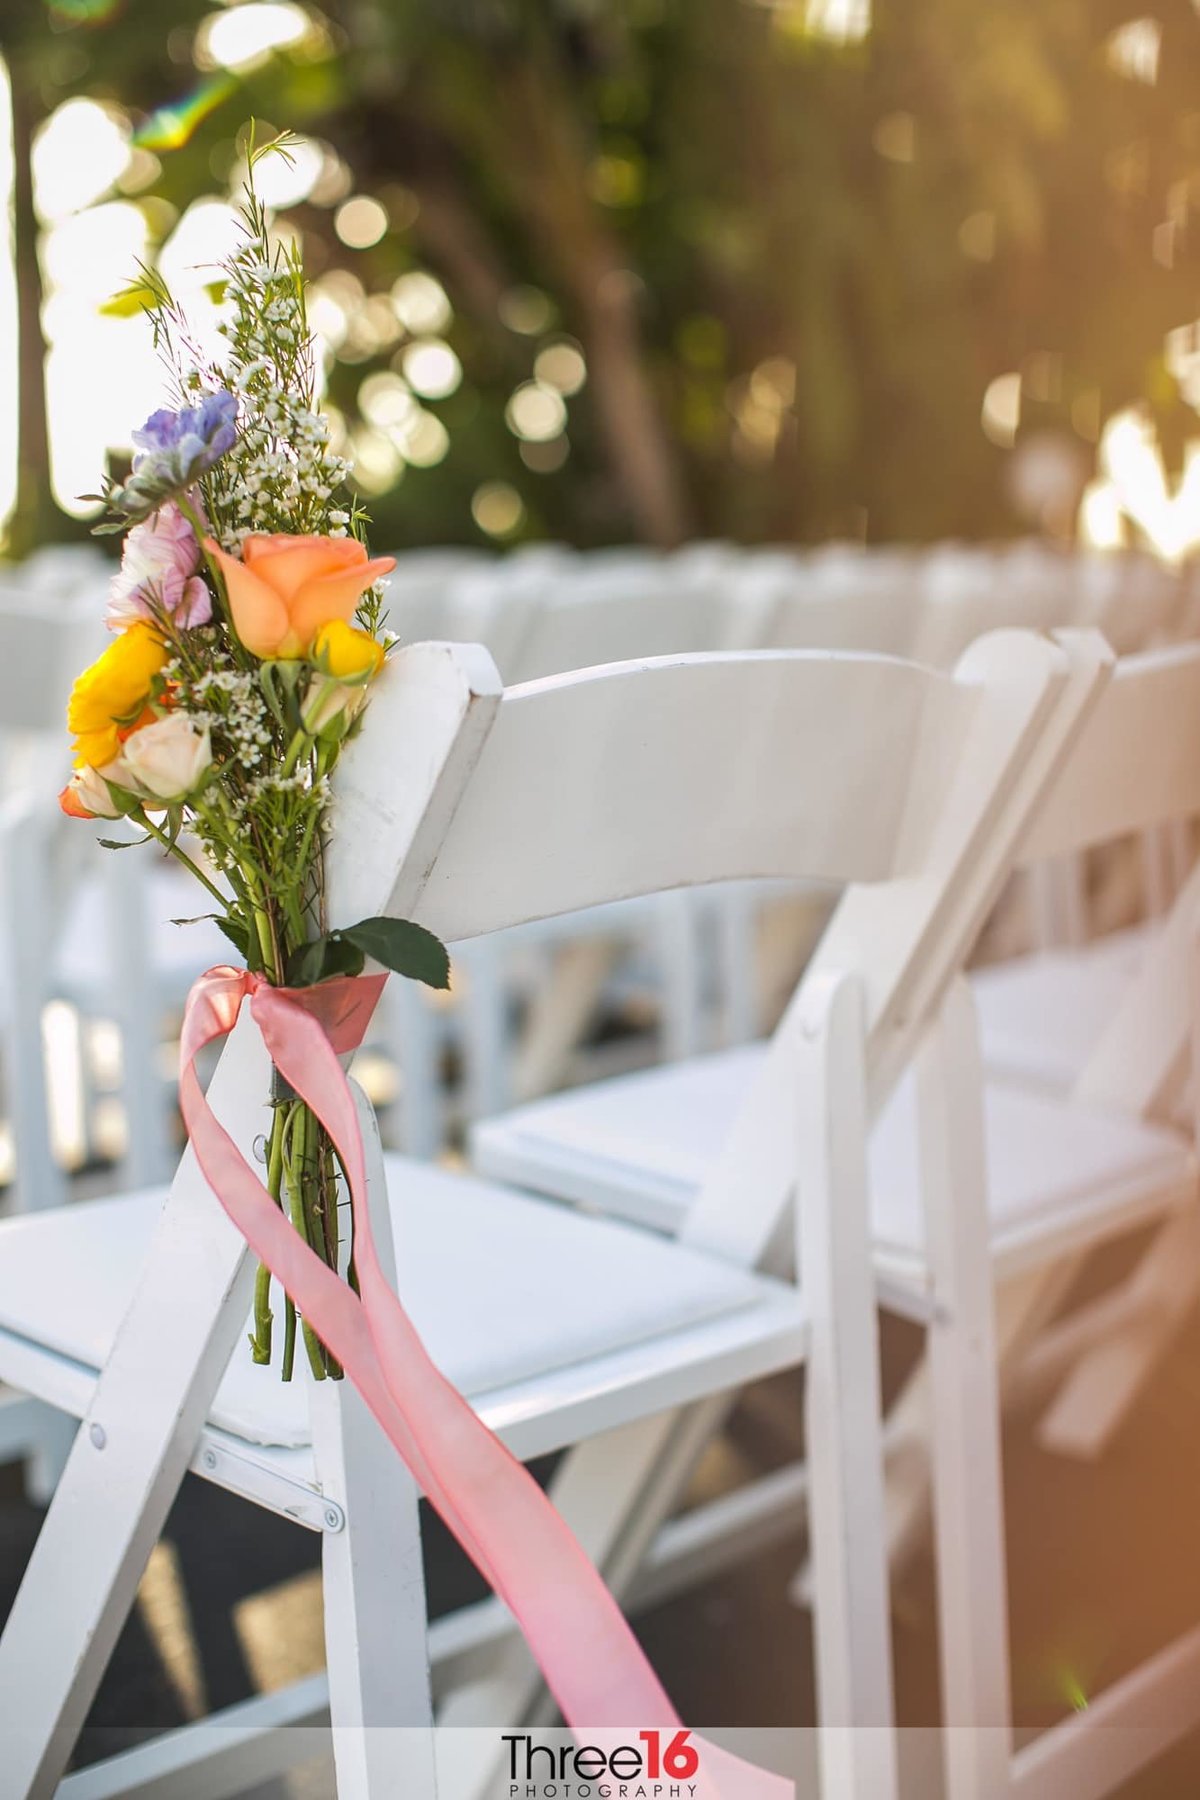 Floral display on each aisle chair for wedding ceremony